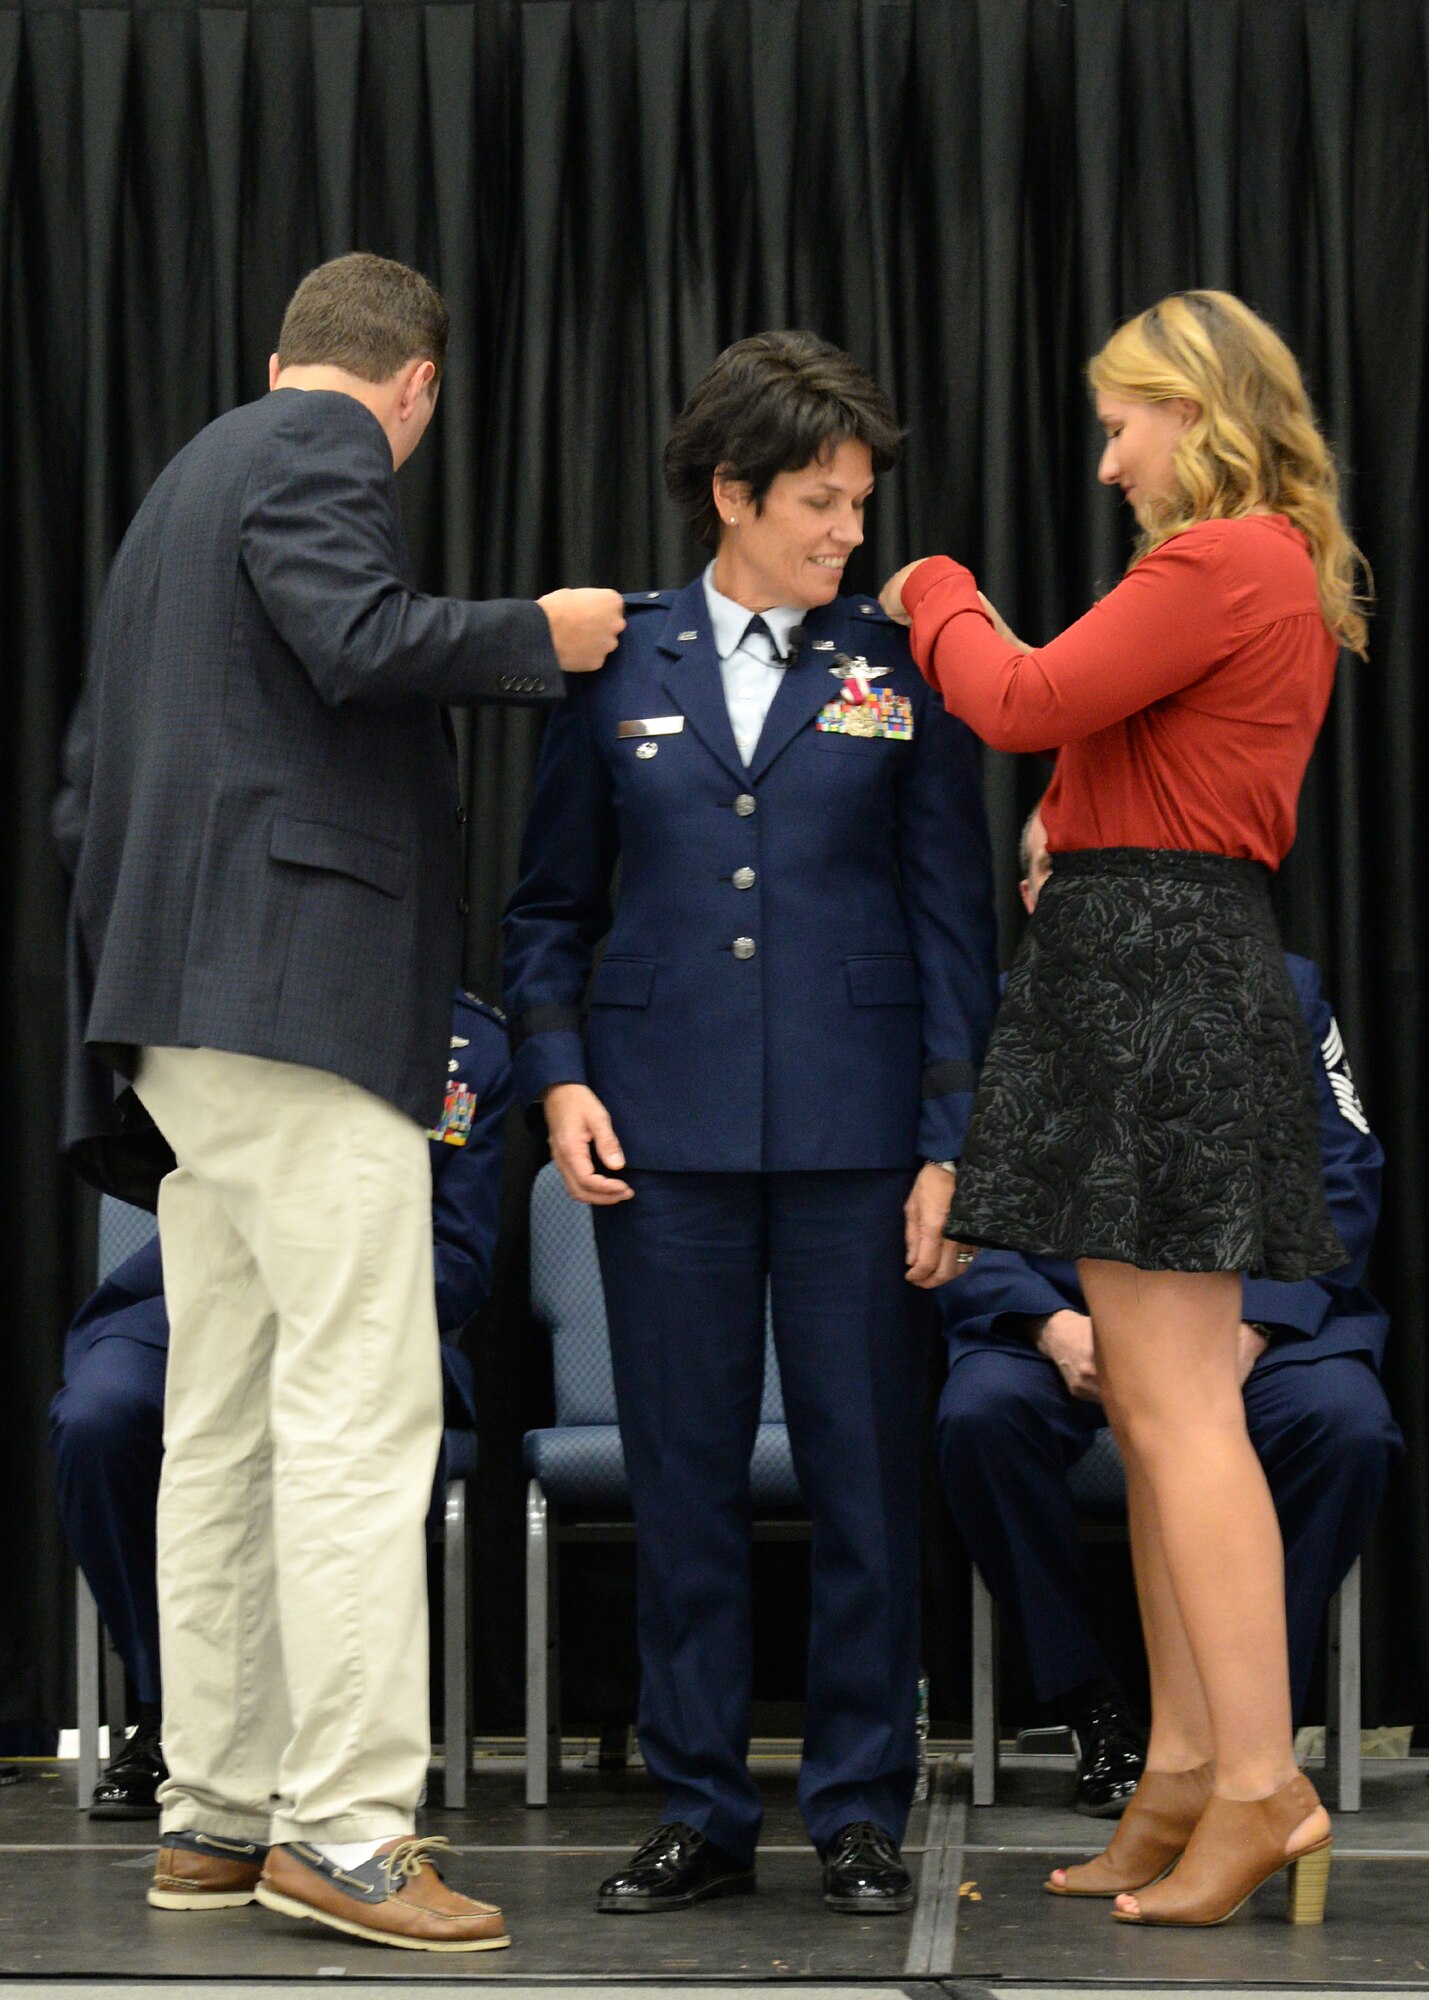 Brigadier Gen. Laurie Farris receives her new rank from her children, Drew, left, and Taylor, during a promotion ceremony at Pease Air National Guard Base, New Hampshire Nov. 7. Farris has been assigned as the N.H. ANG chief of staff responsible for the direction and coordination of staff activities for Joint Force Headquarters. (U.S. Air National Guard photo by Senior Airman Kayla McWalter) 